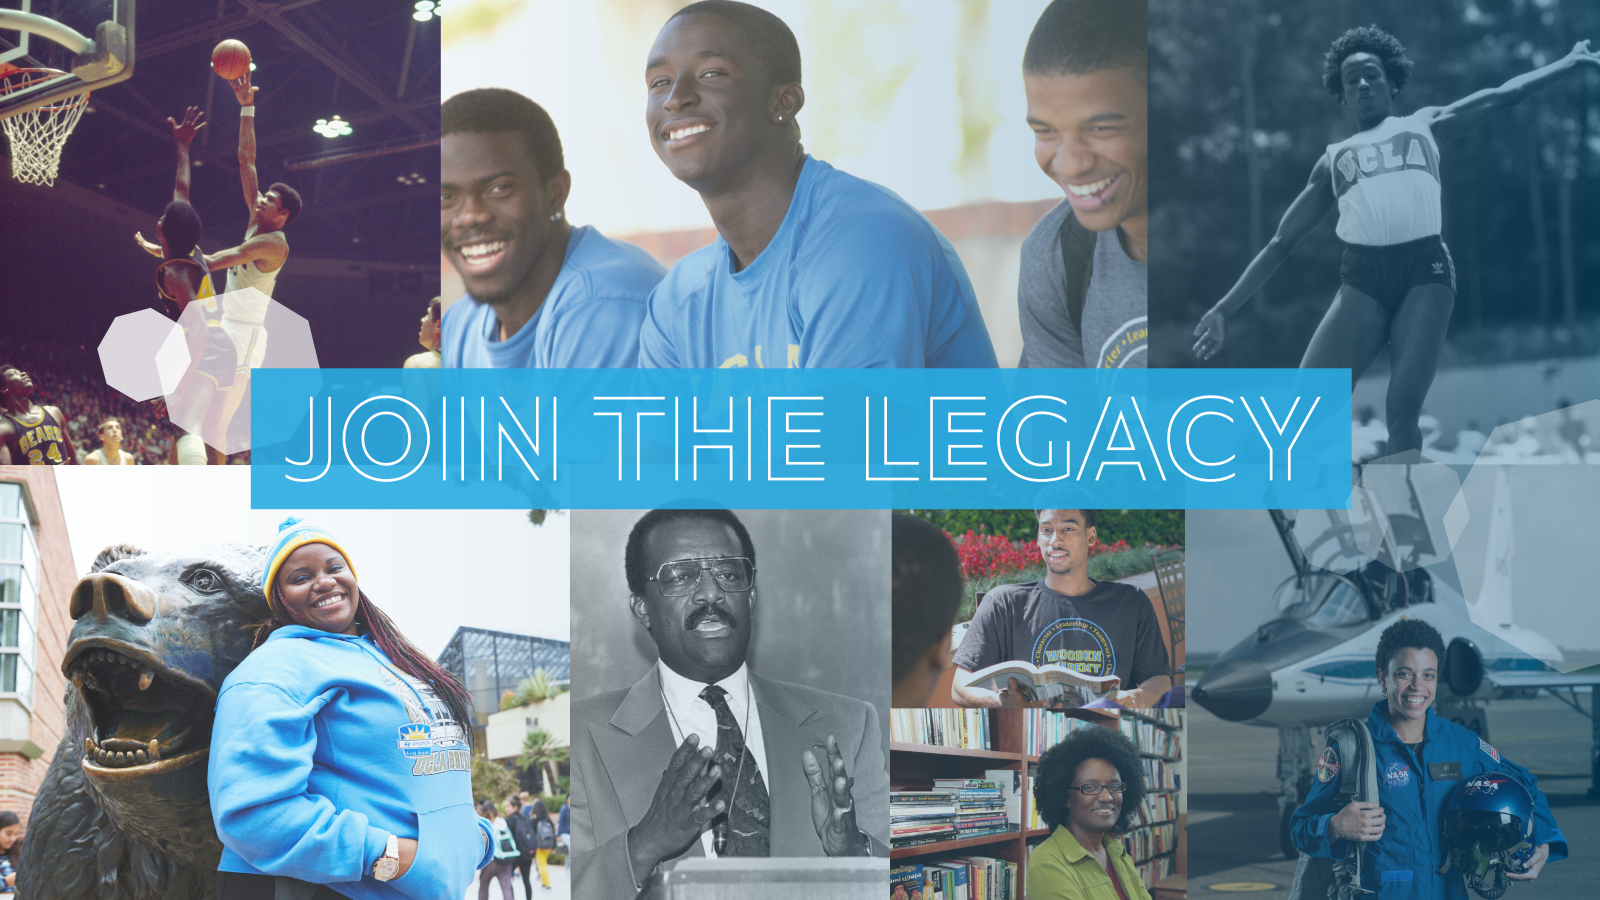 "Join the Legacy": Image of black UCLA student and alumni